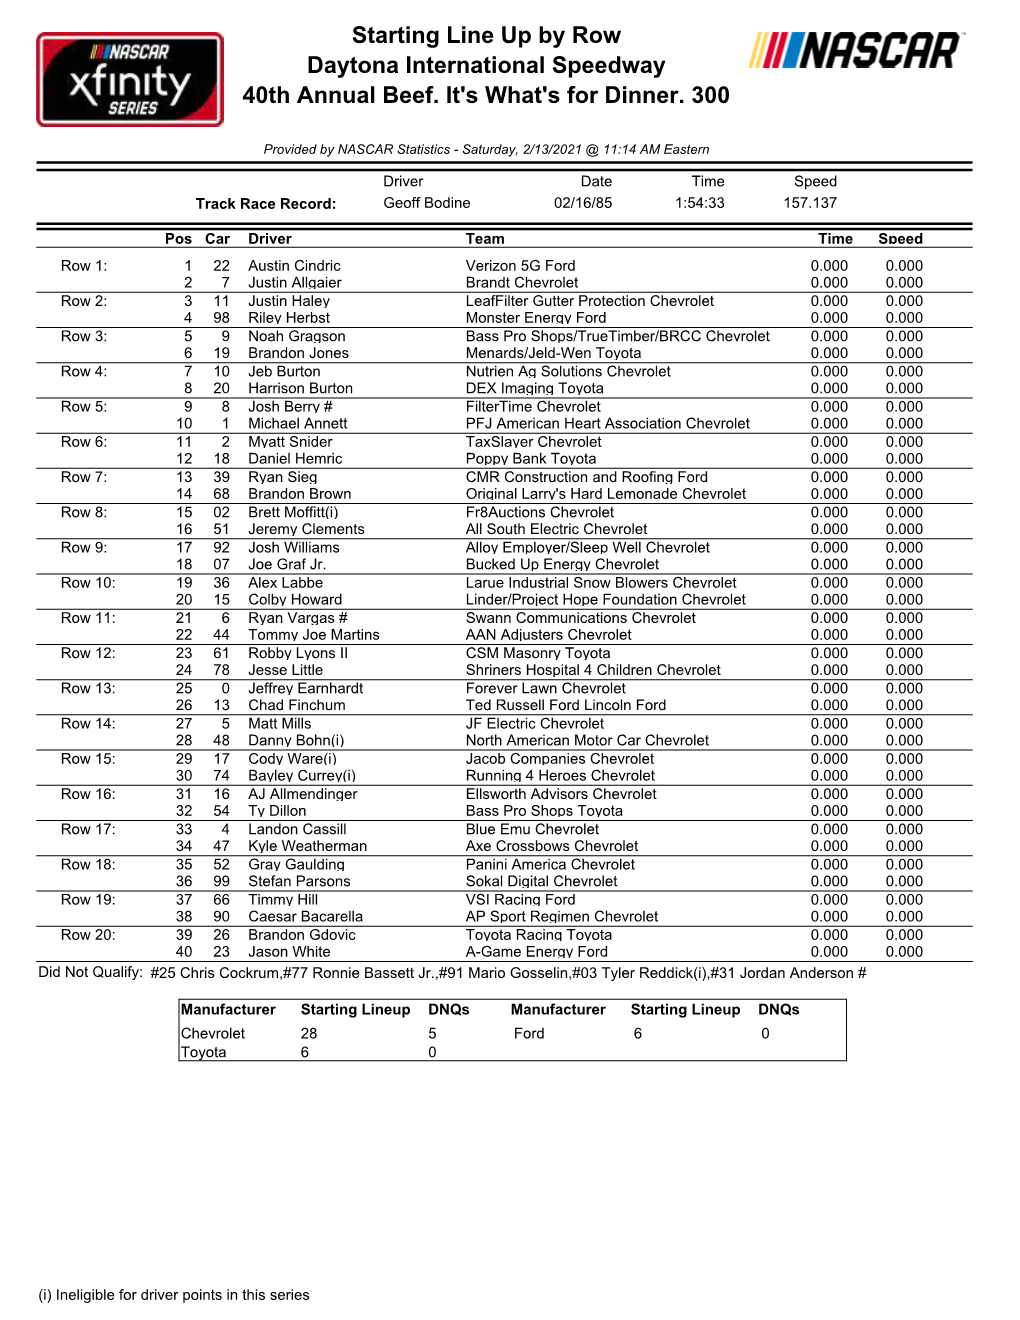 Starting Line up by Row Daytona International Speedway 40Th Annual Beef